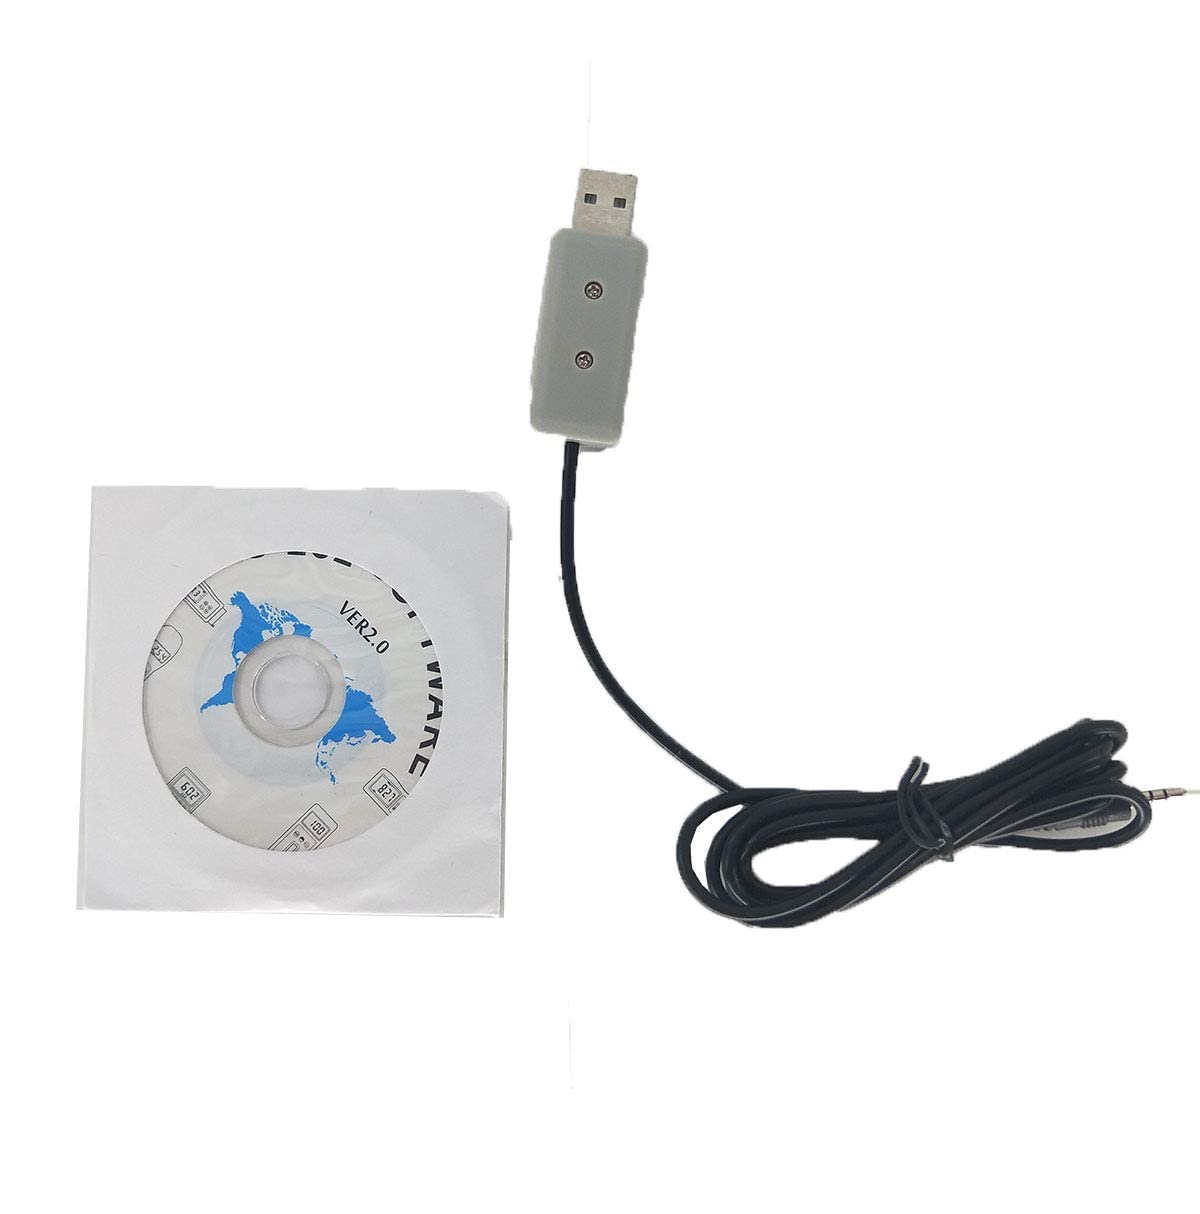 VTSYIQI RS-232C Data Cable with Software for VM-6310 Digital Vibration Meter Tester Vibrometer Gauge Connect to PC